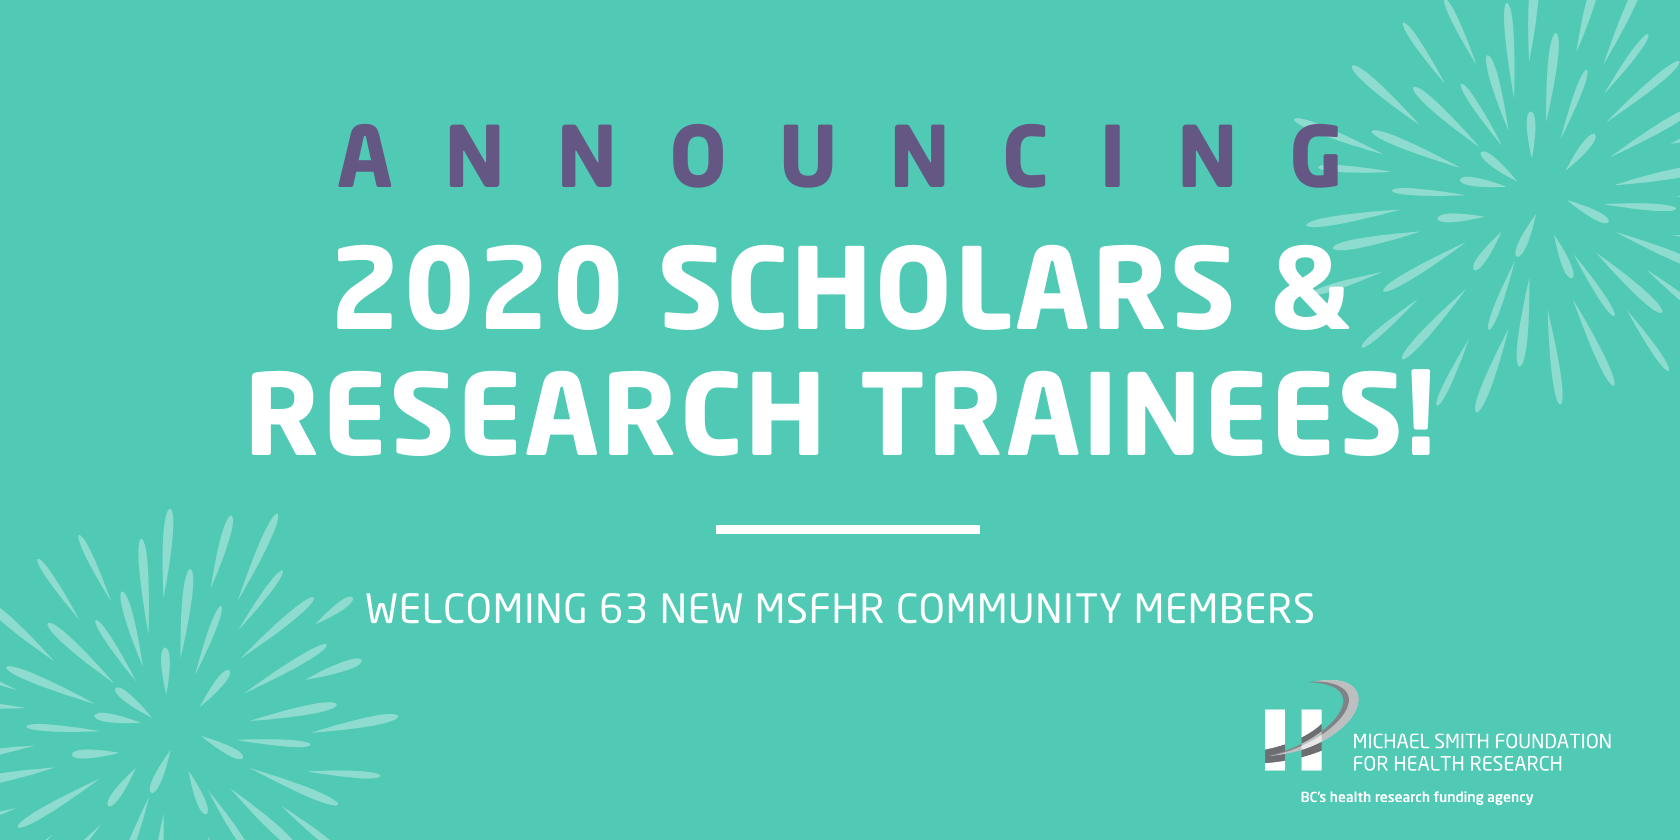 Announcing the 2020 MSFHR Scholars and Research Trainees